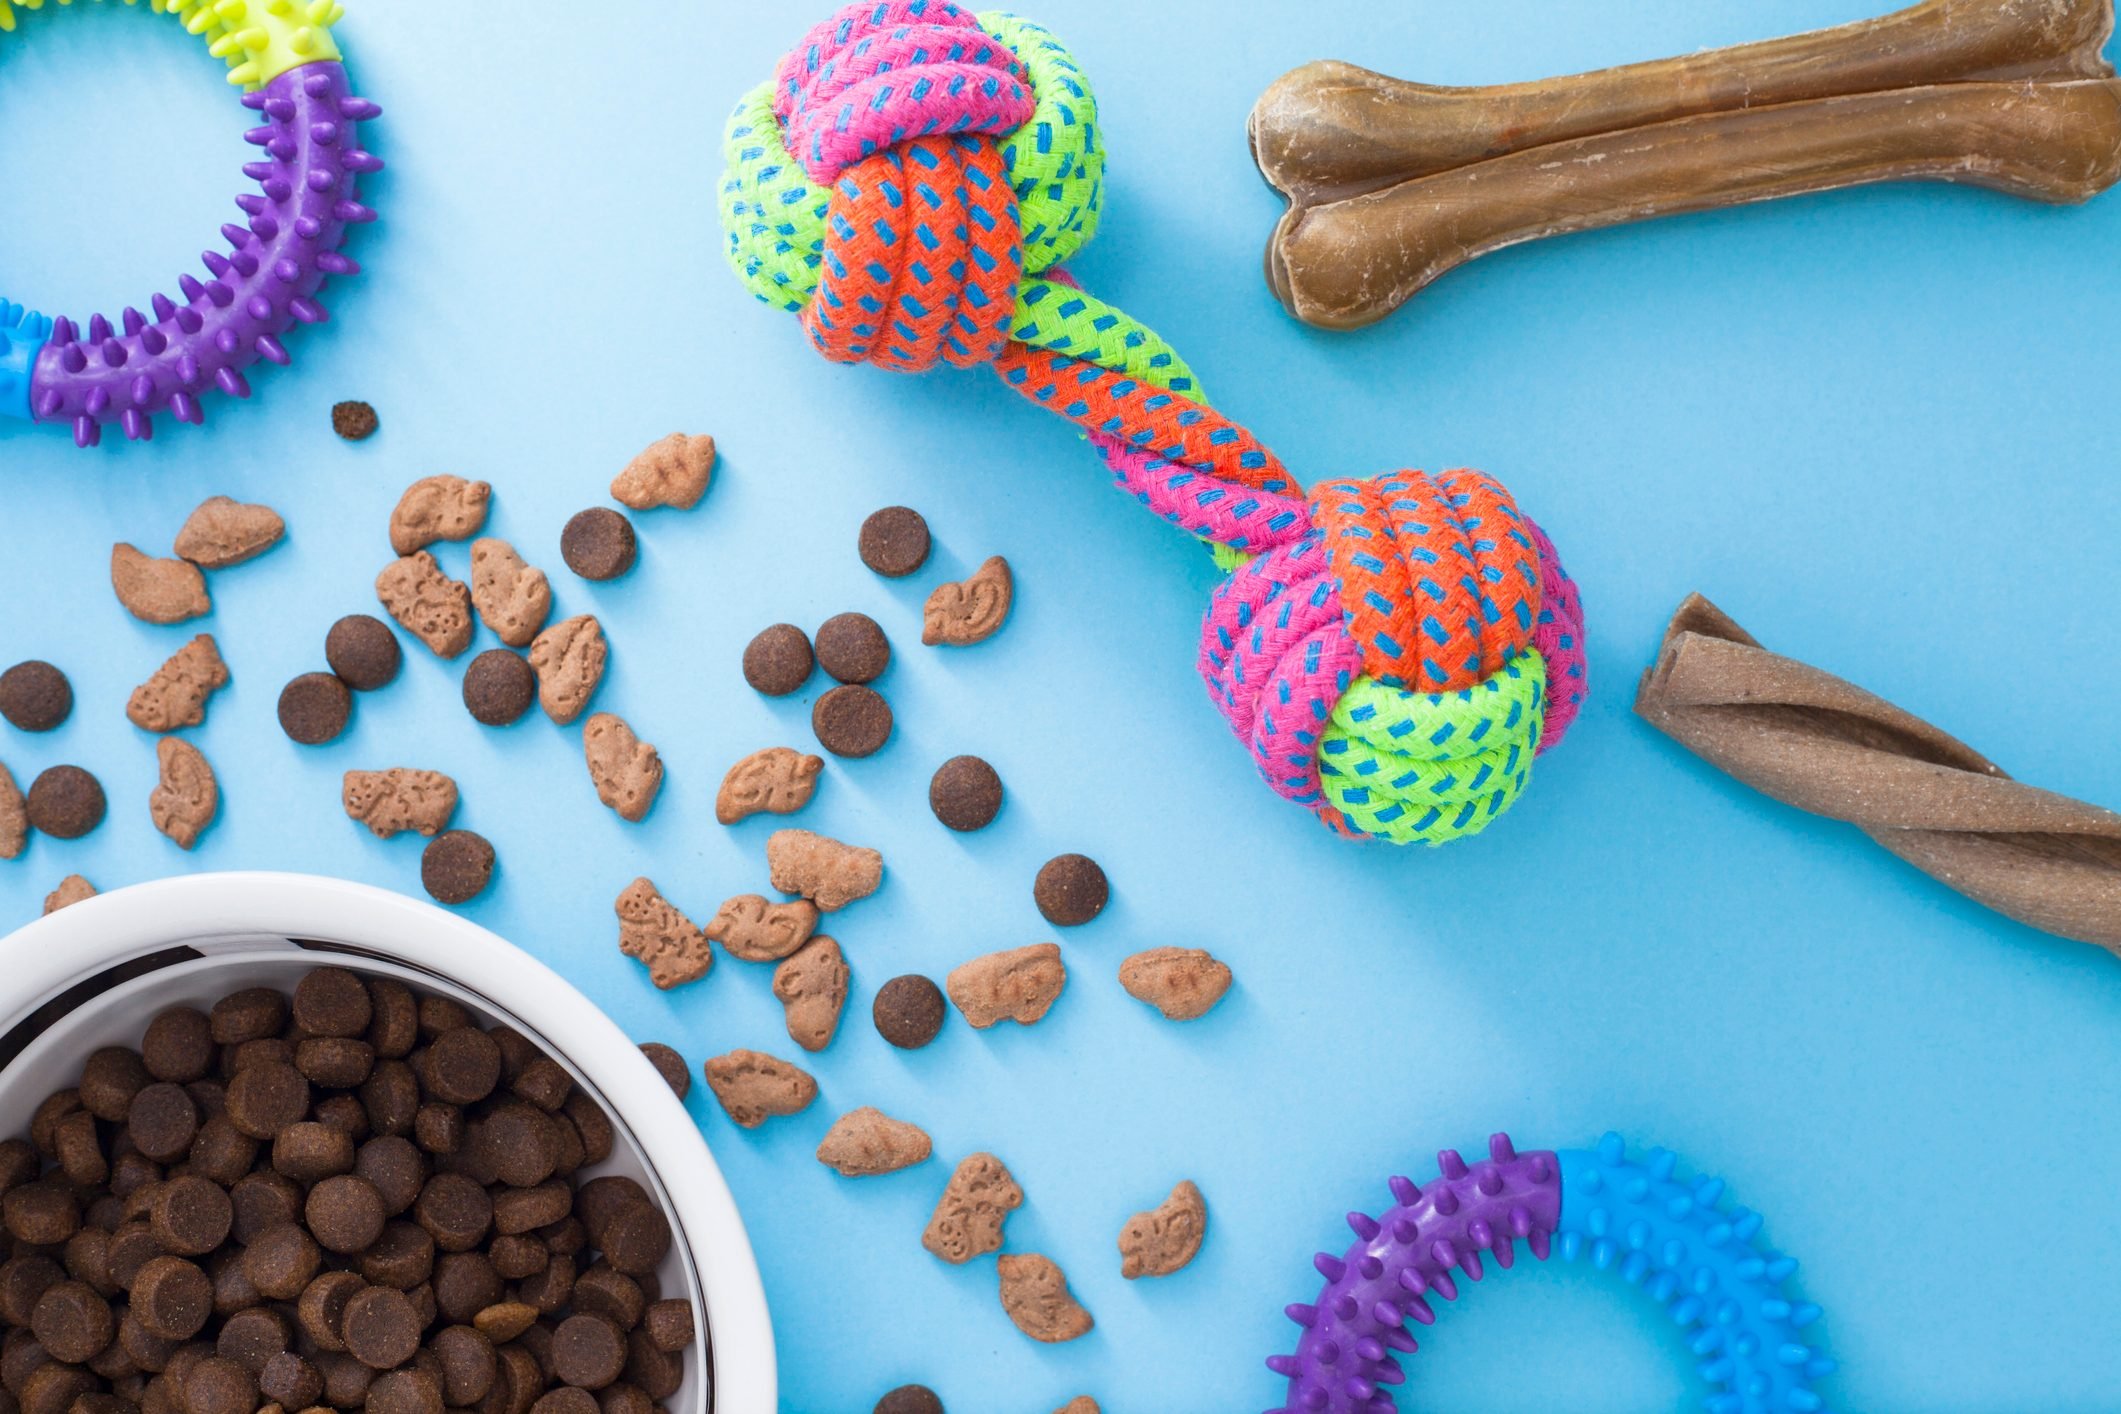 Assortment of dog toys, treats, and dry kibble